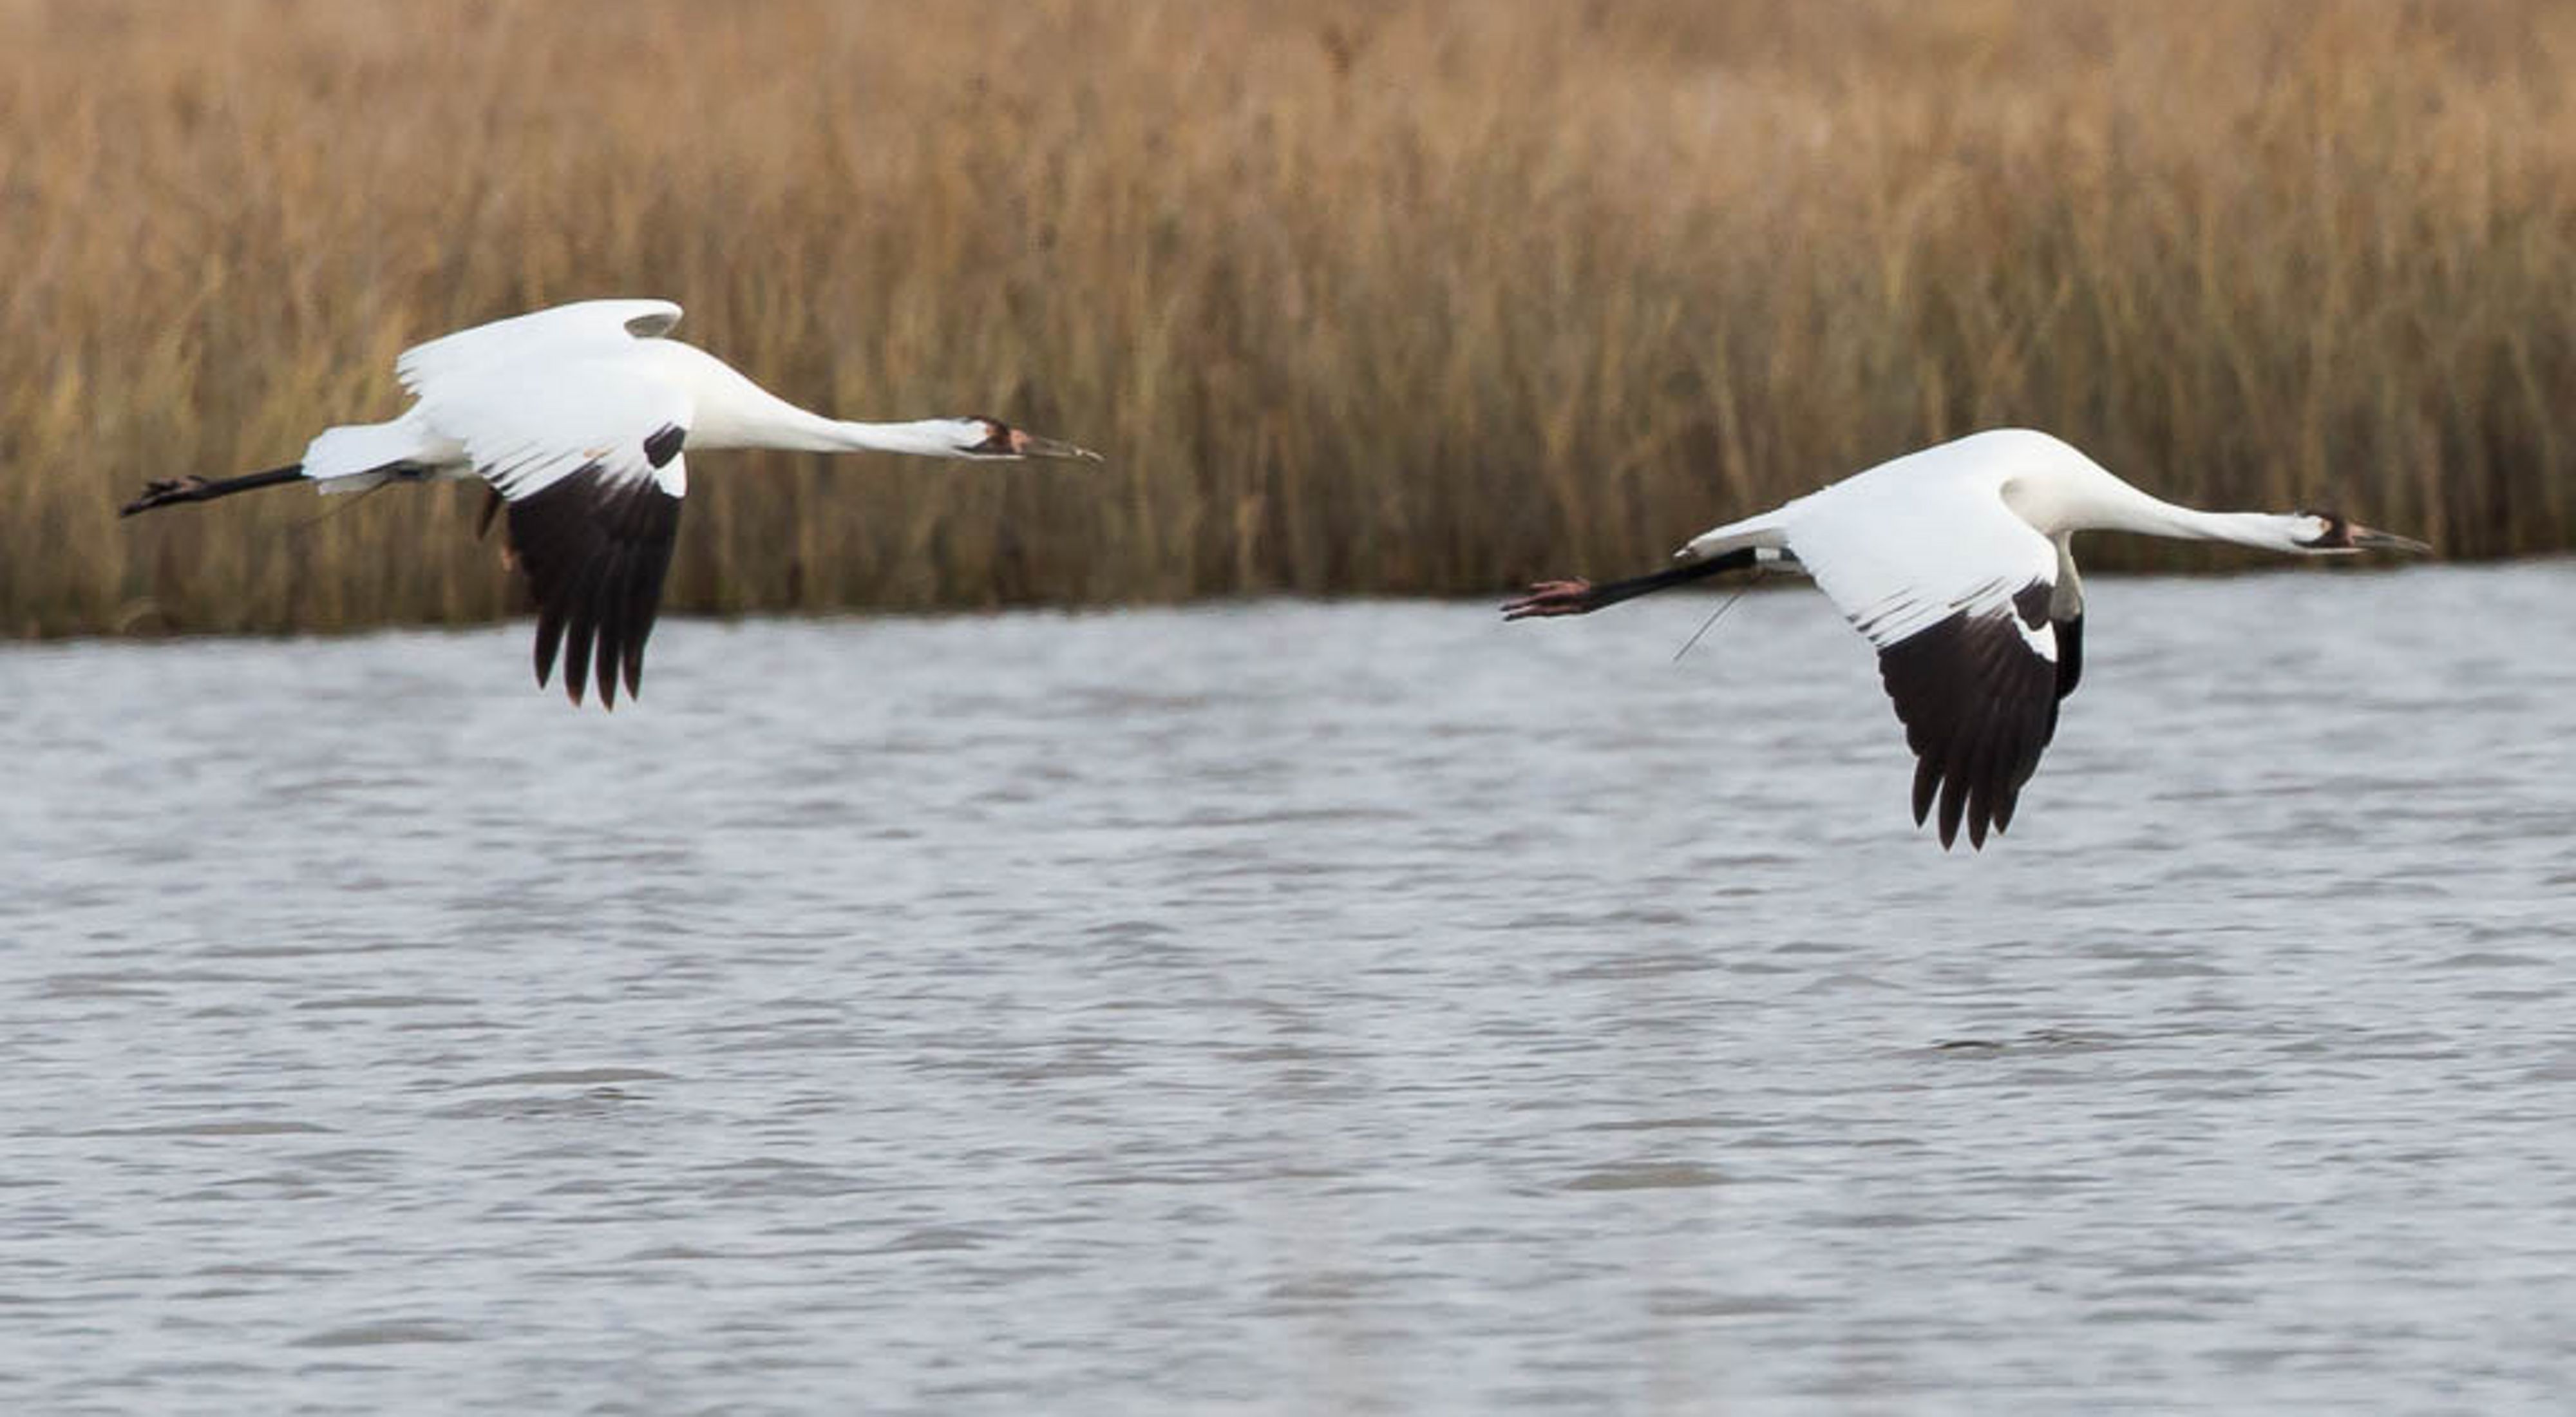 Two white and black whooping cranes mid-flight over a lake.